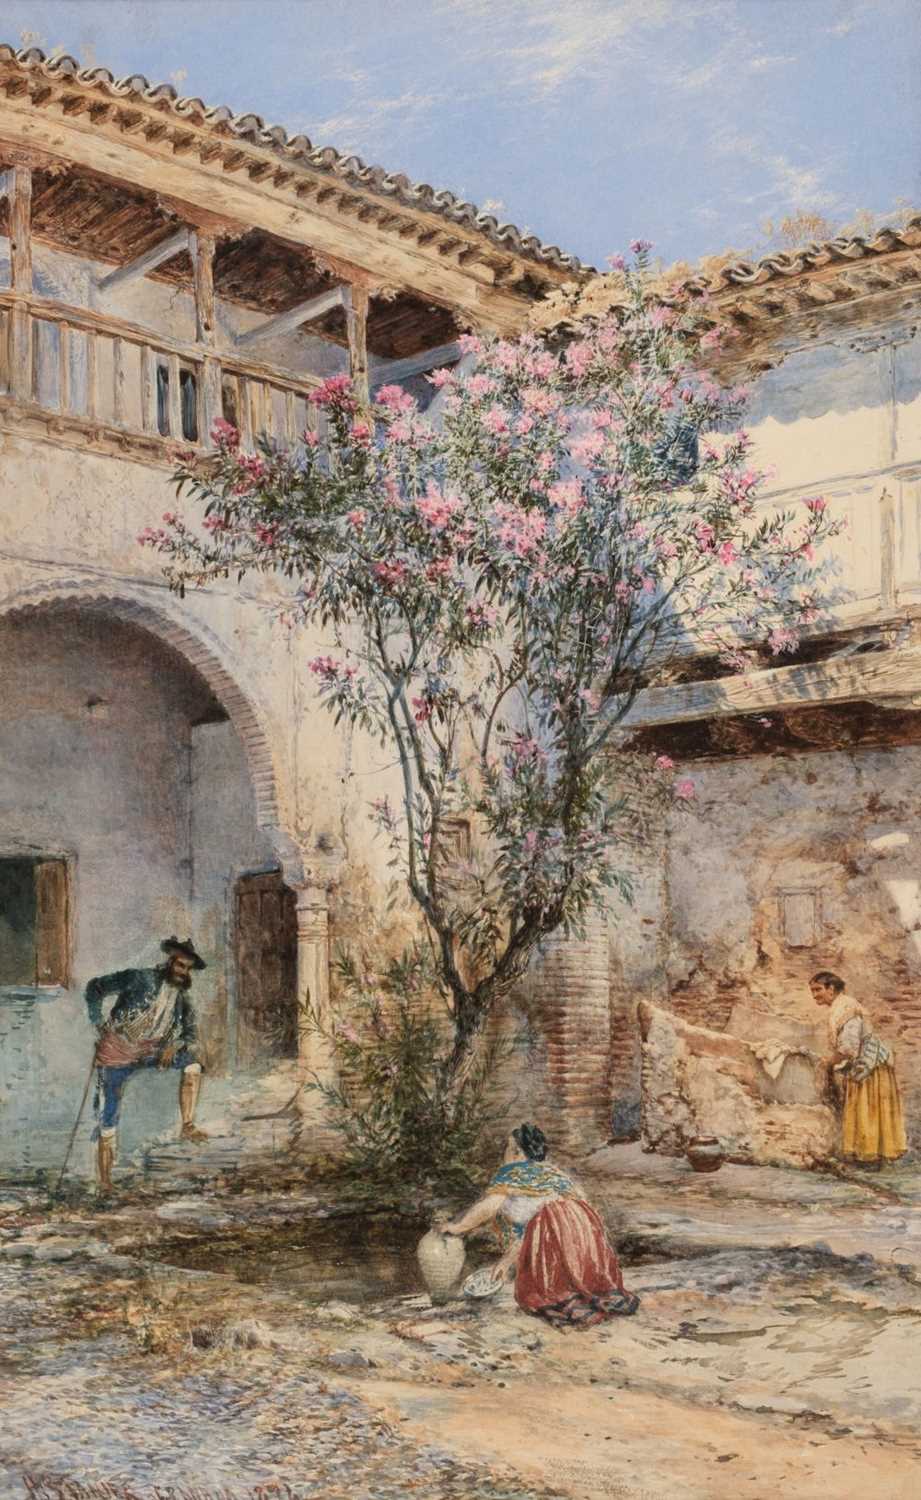 Lot 343 - Stanier (Henry, circa 1831-1894). A Spanish courtyard scene in Granada with figures, 1894